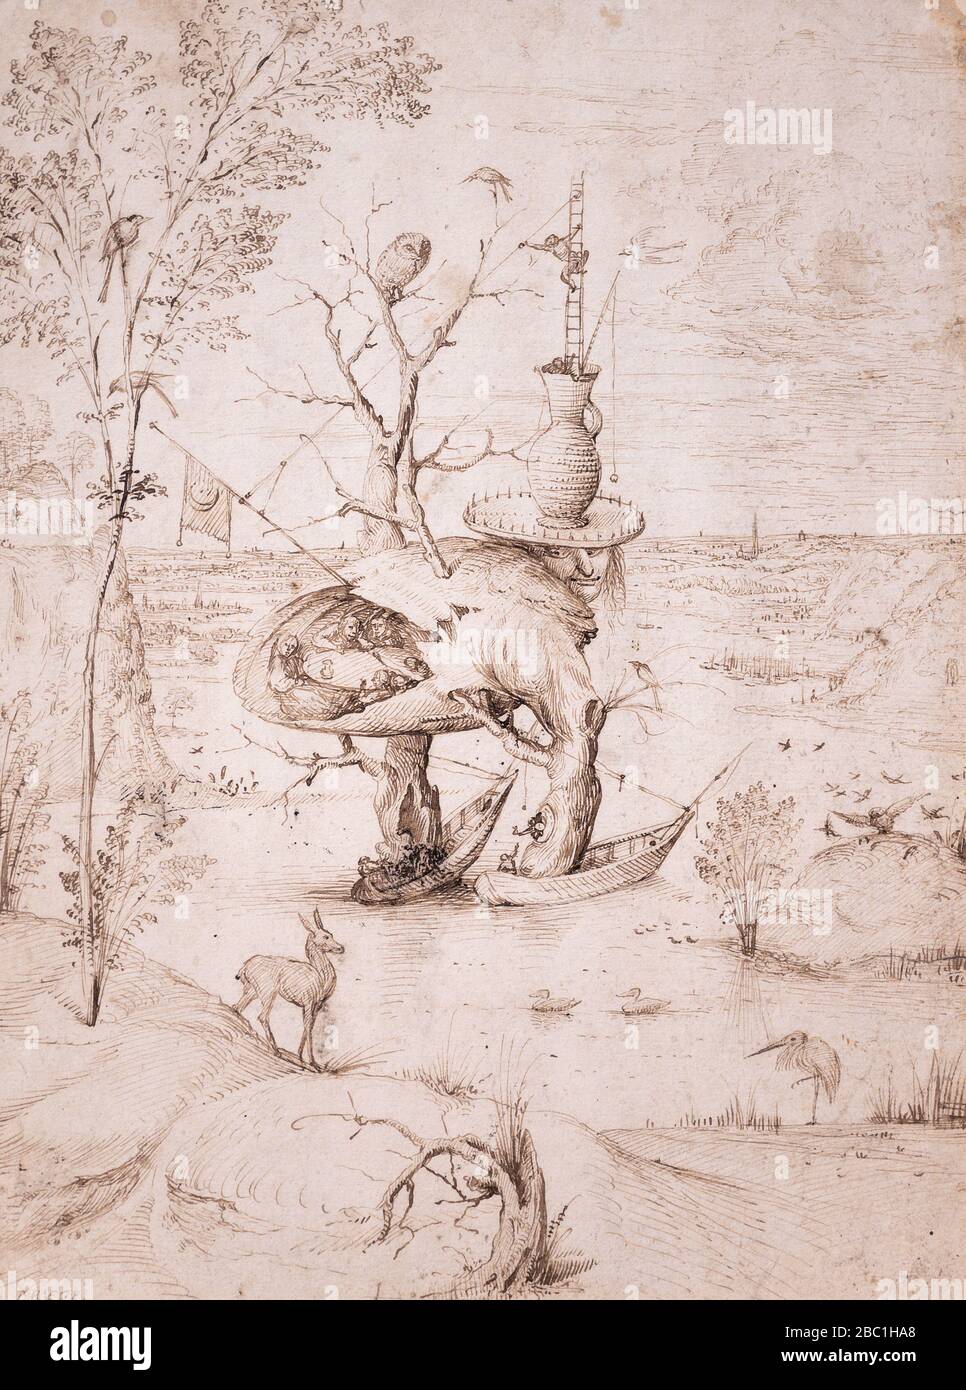 "The Tree-Man" (c. 1500) by Hieronymus Bosch (1450–1516). Pen and brown ink. Facsimile. Stock Photo